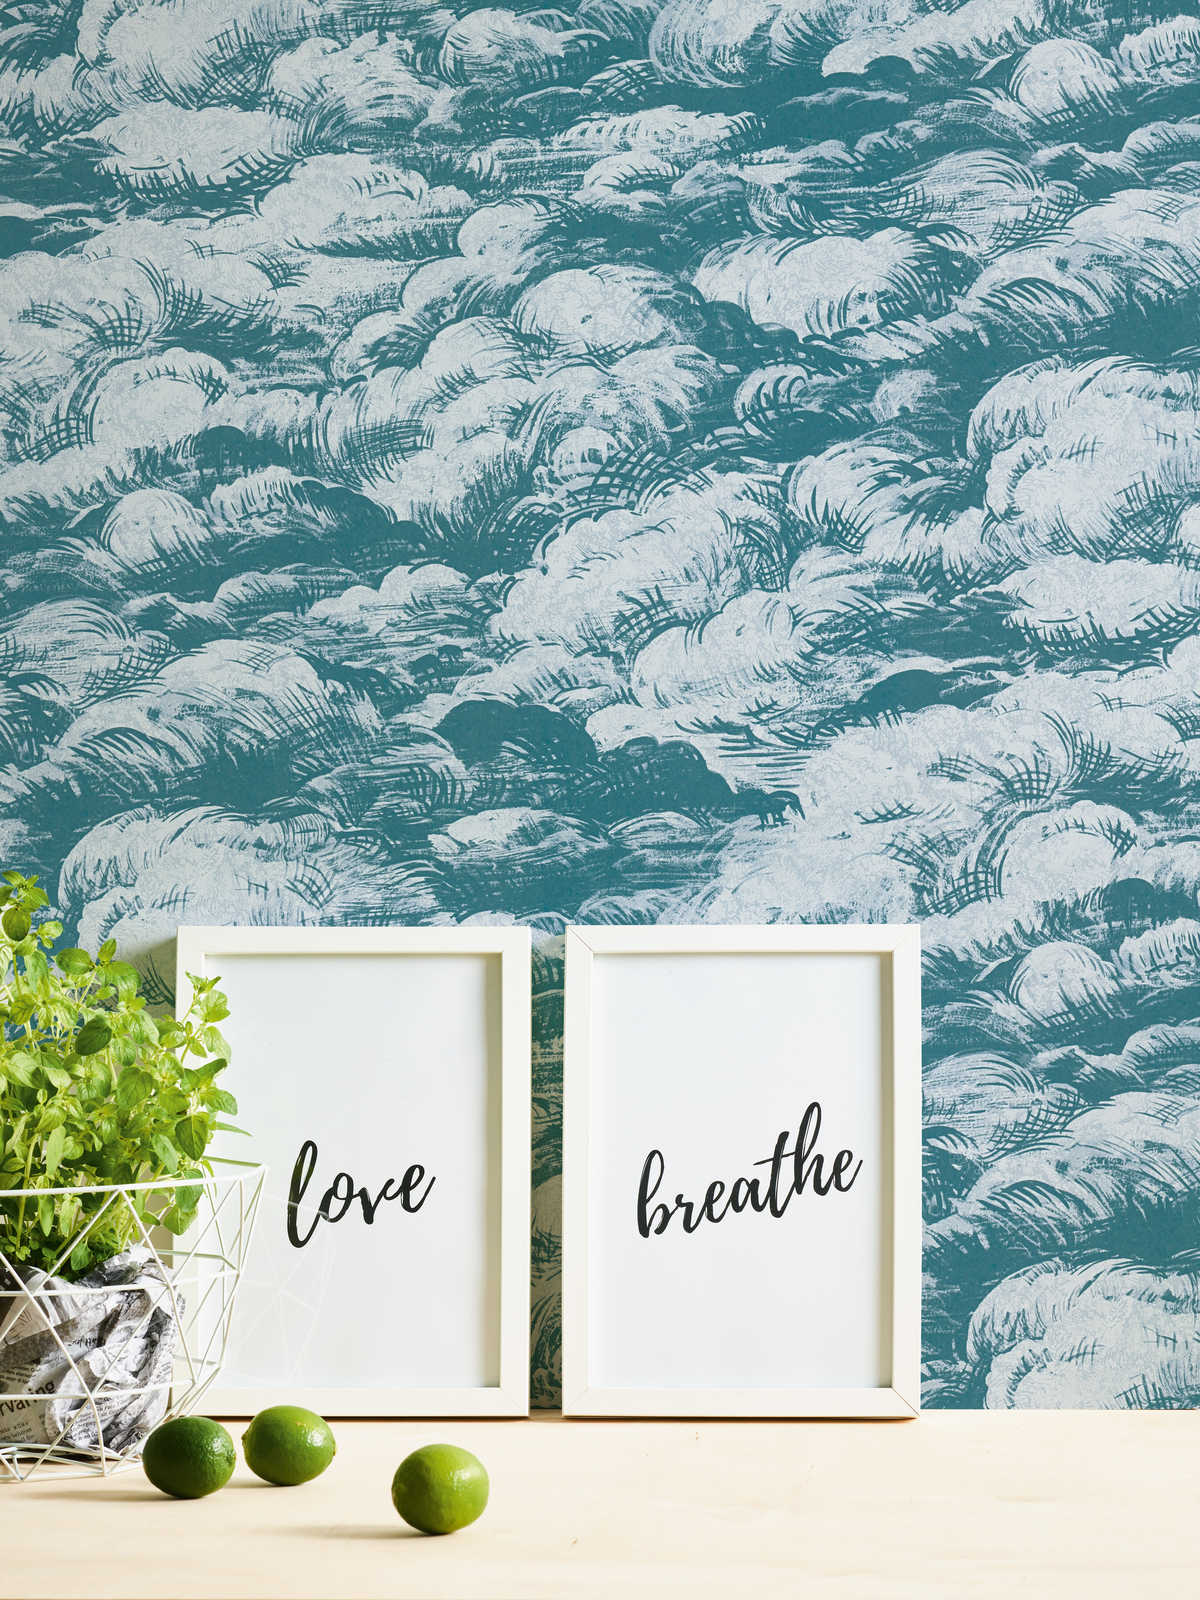             Wallpaper blue green clouds landscape in vintage style - blue, white
        